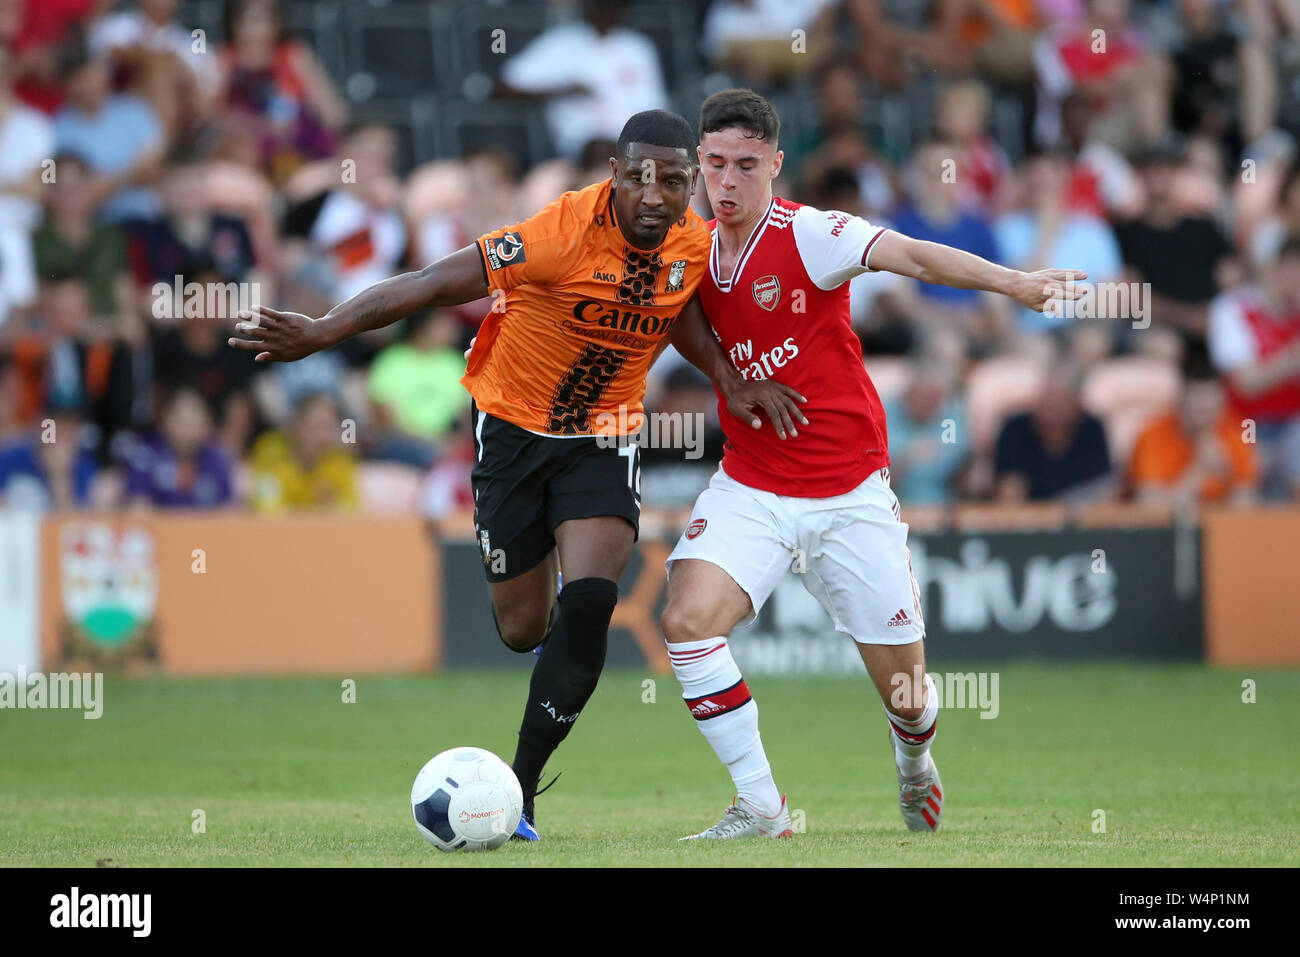 Barnet's Andre Boucaud (left) and Arsenal's Harrison Clarke battle for the ball during the pre-season friendly match at The Hive, London. Stock Photo